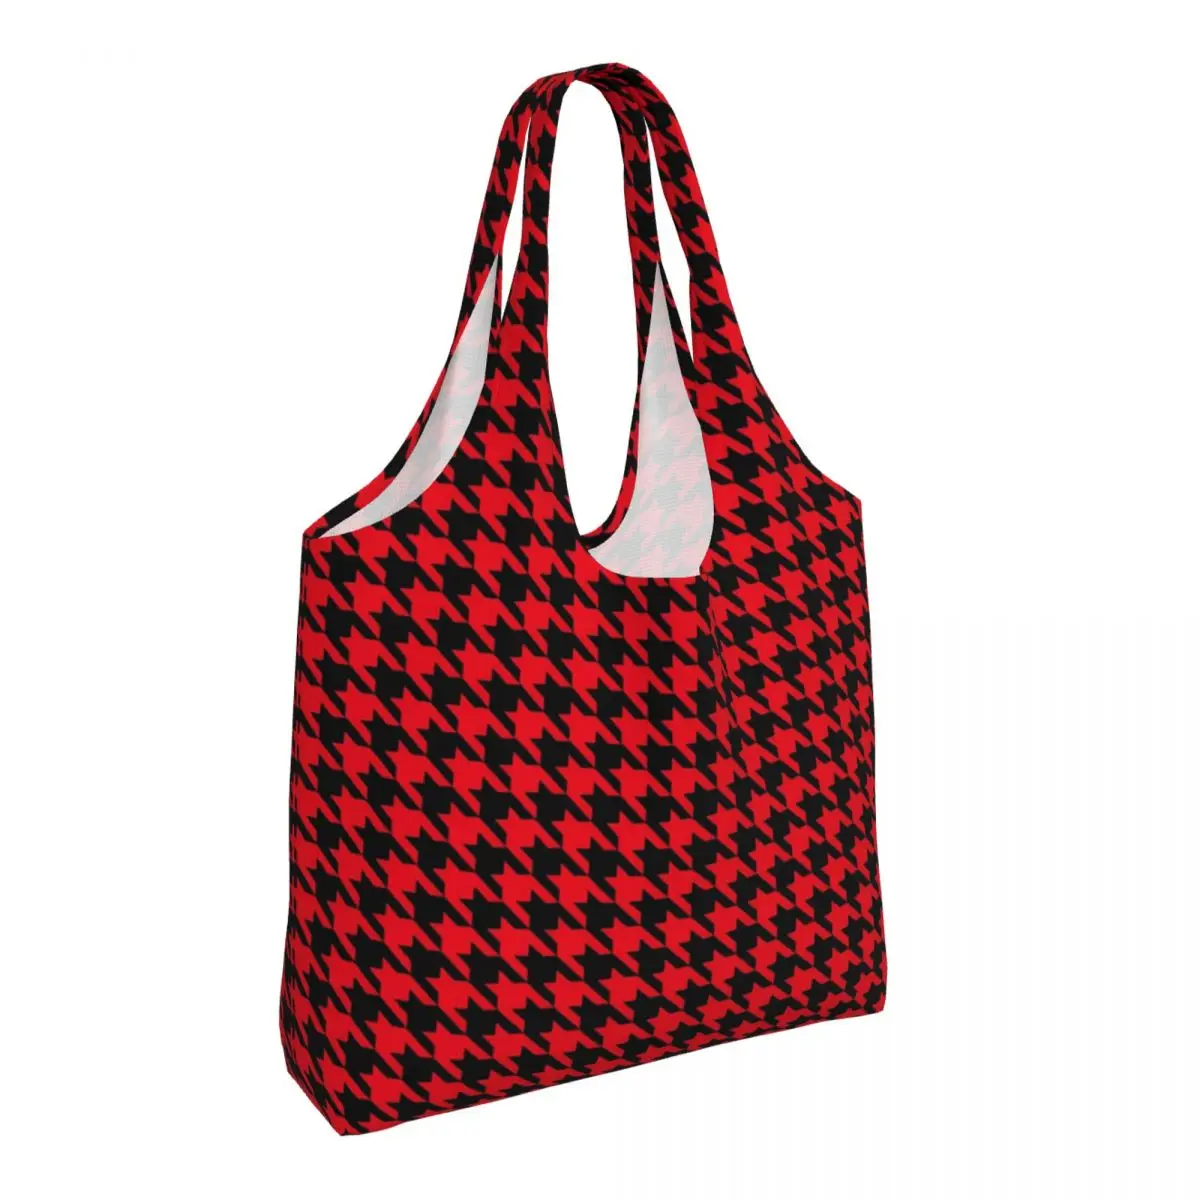 

Vintage Houndstooth Shopper Bag Black and Red Shopping Bags Female Streetwear Cloth Tote Bag Casual Print Handbags